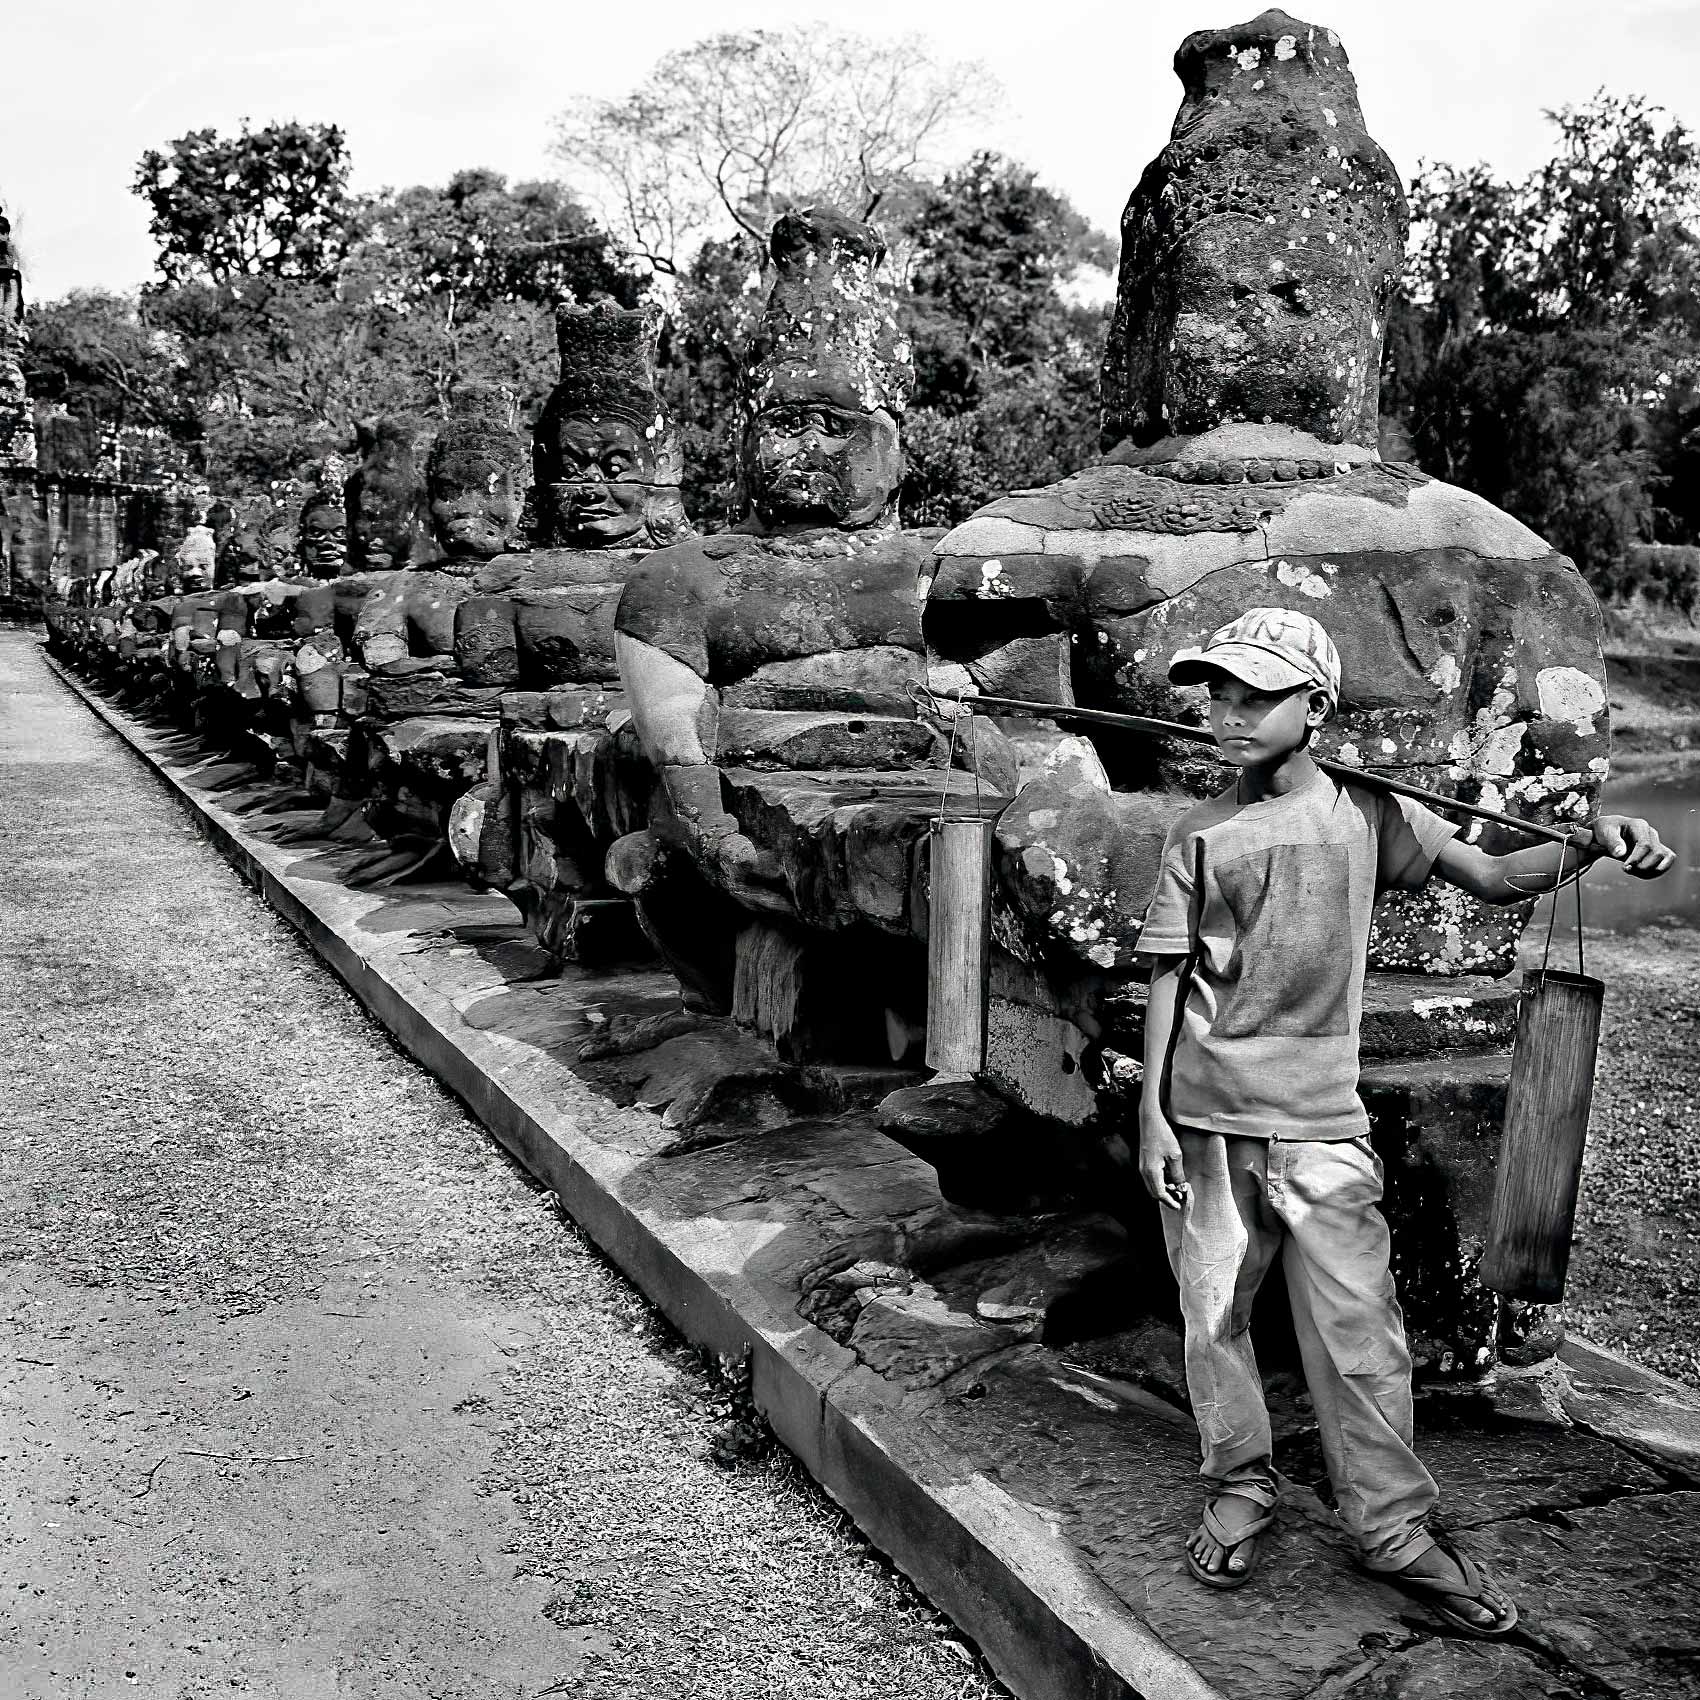 a-young-boy-stands-at-the-entrance-to-angkor-wat-palace-in-cambodia